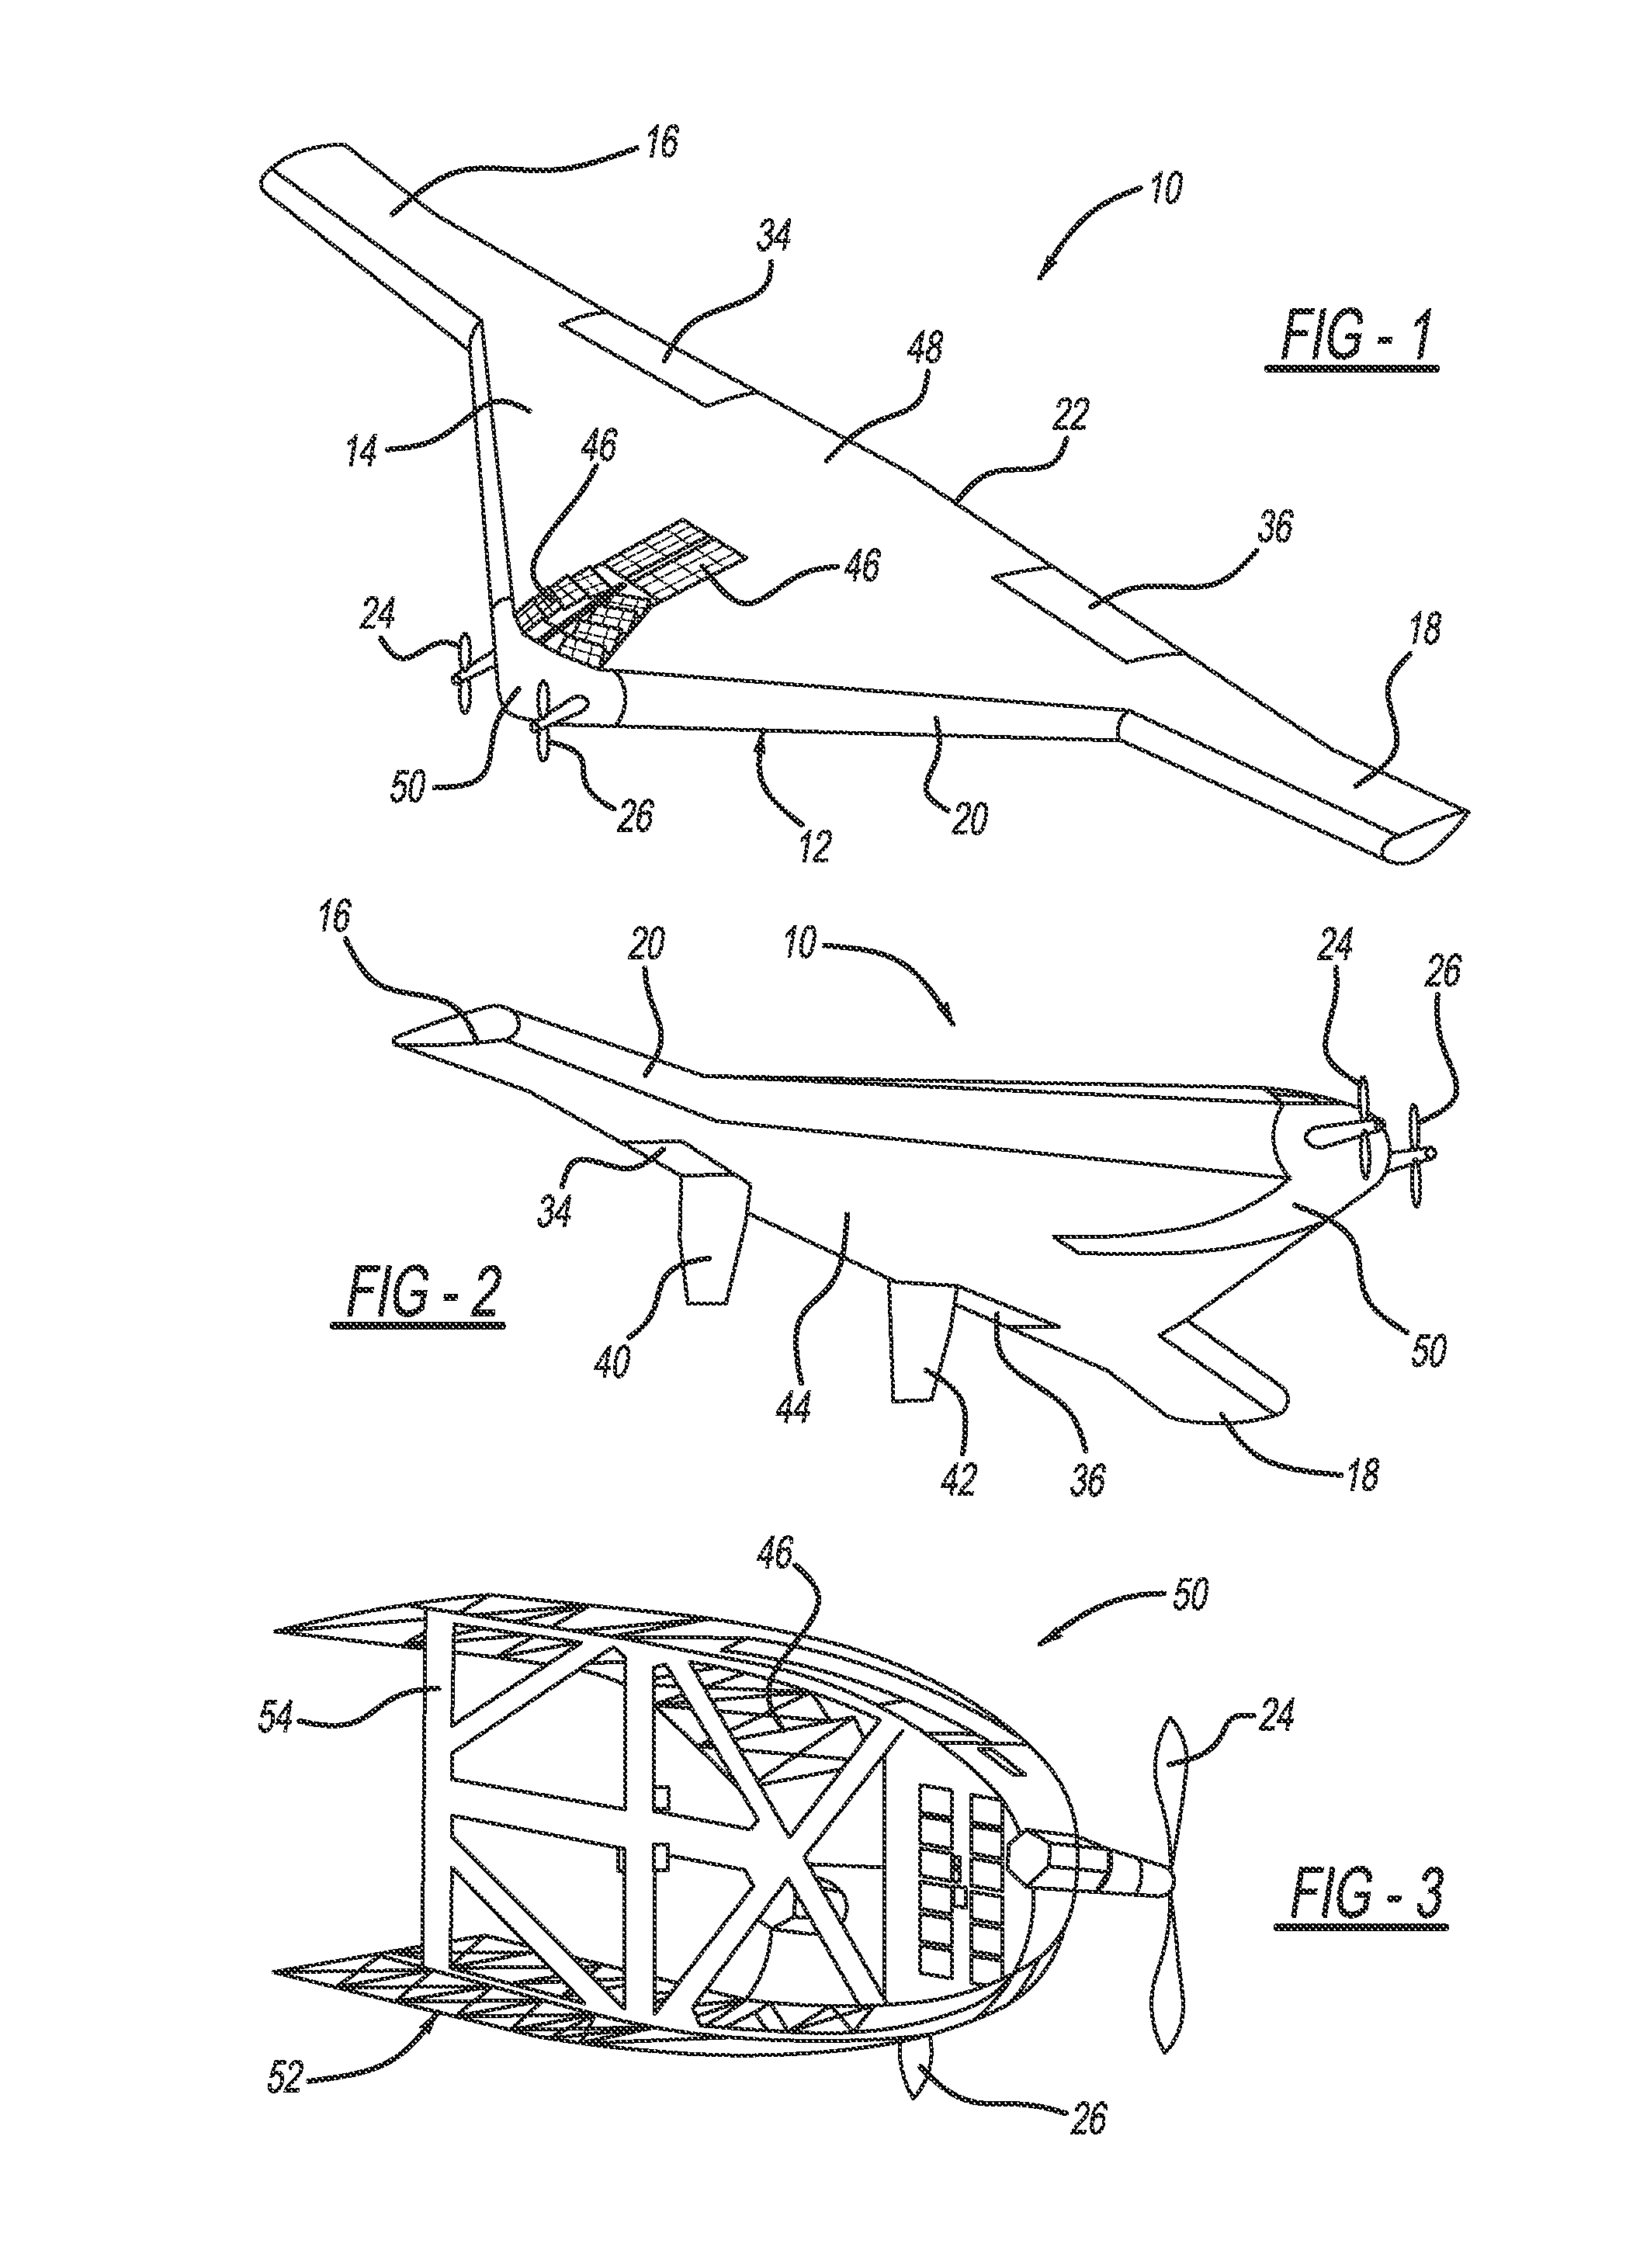 Lifting entry/atmospheric flight (LEAF) unified platform for ultra-low ballistic coefficient atmospheric entry and maneuverable atmospheric flight at solar system bodies